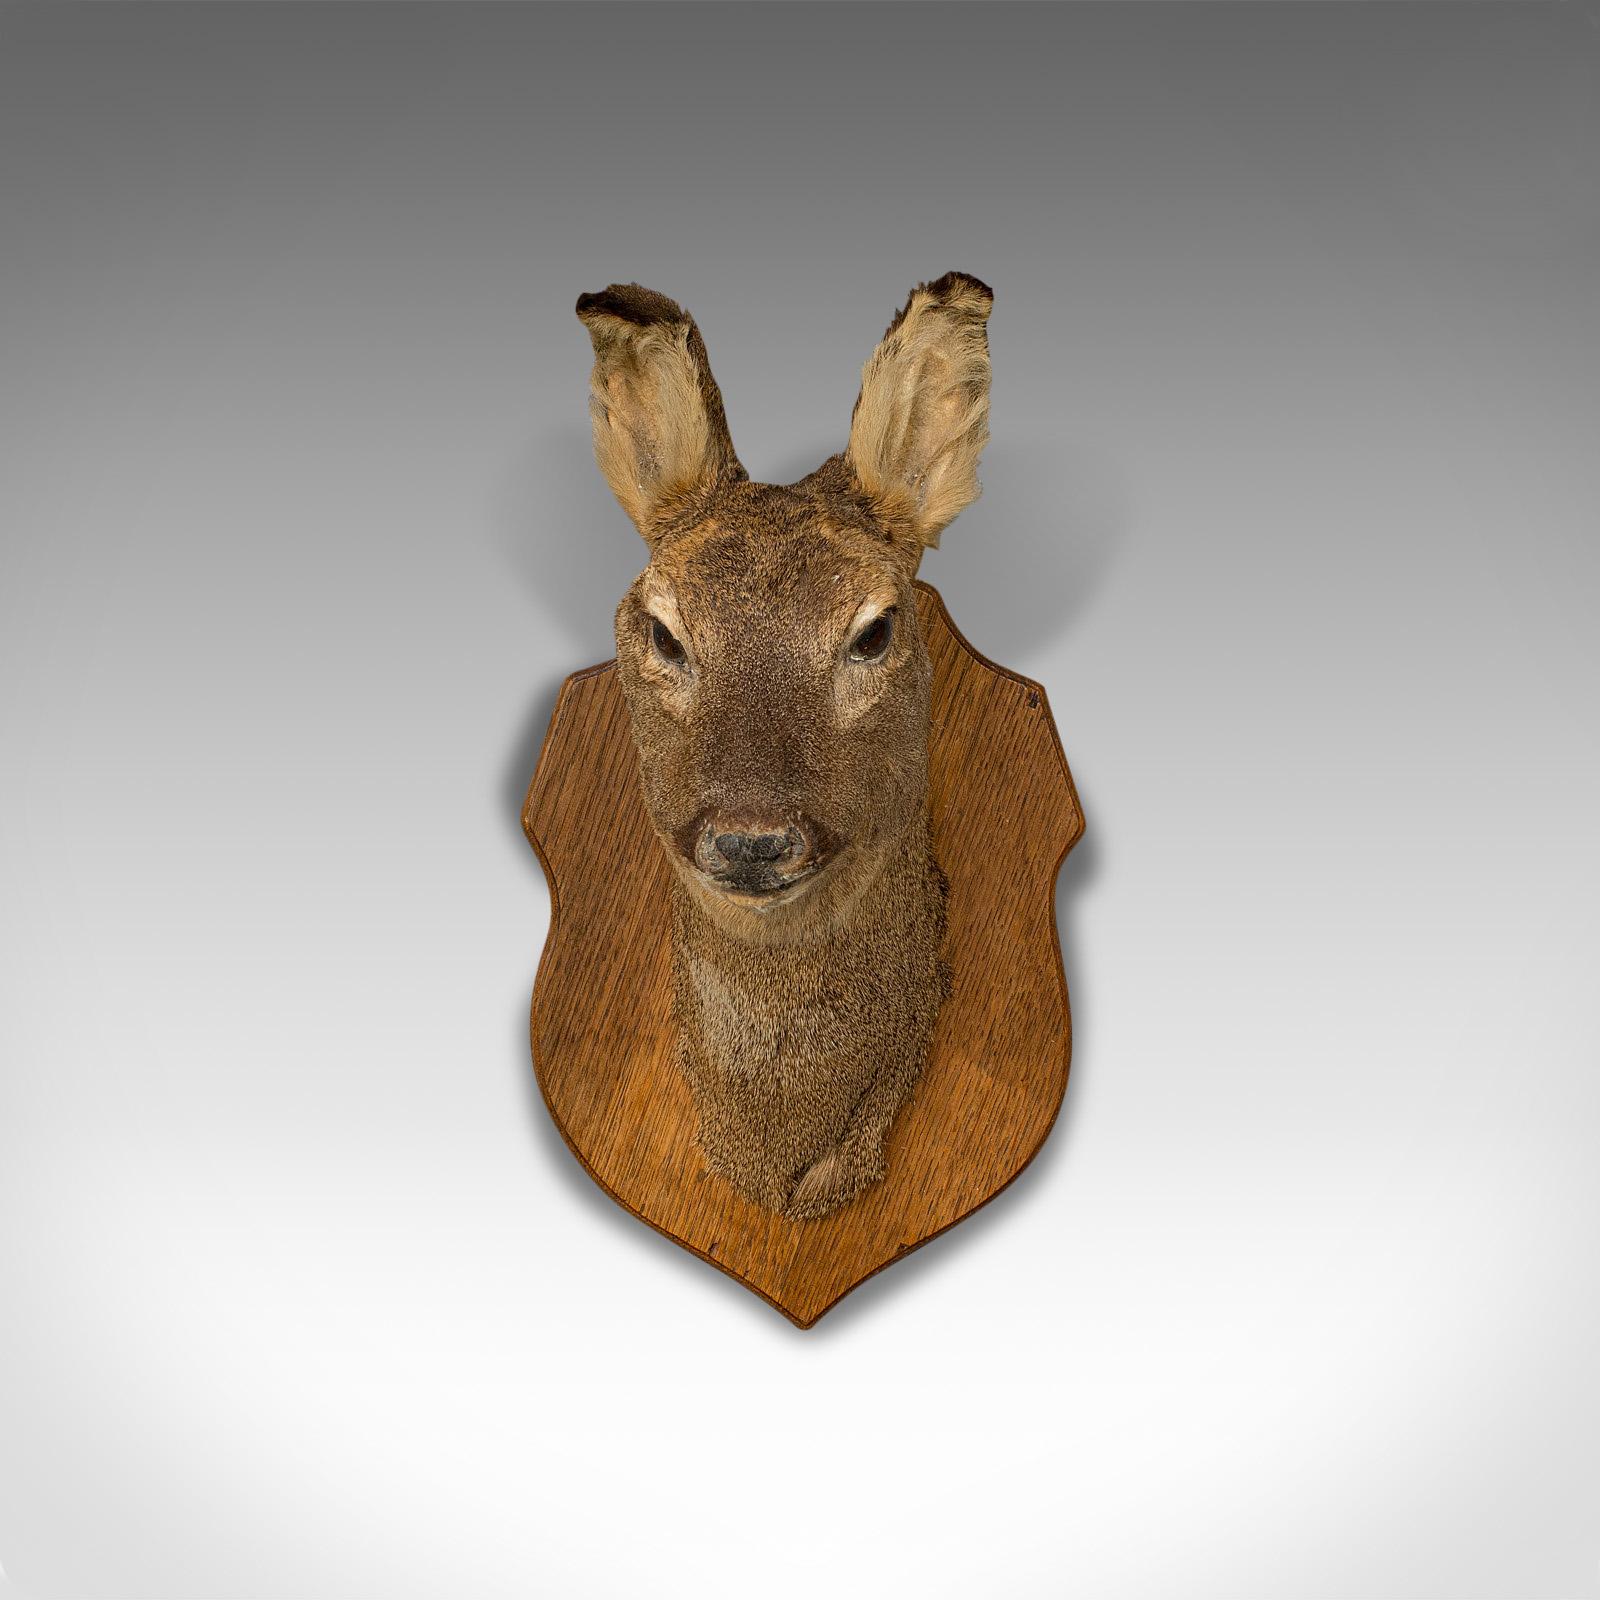 This is a vintage deer trophy. An English, taxidermy study on an oak display mount of natural countryside interest, dating to the late 20th century.

Inviting, lovingly preserved trophy
Displays a desirable aged patina
Taxidermy is of the